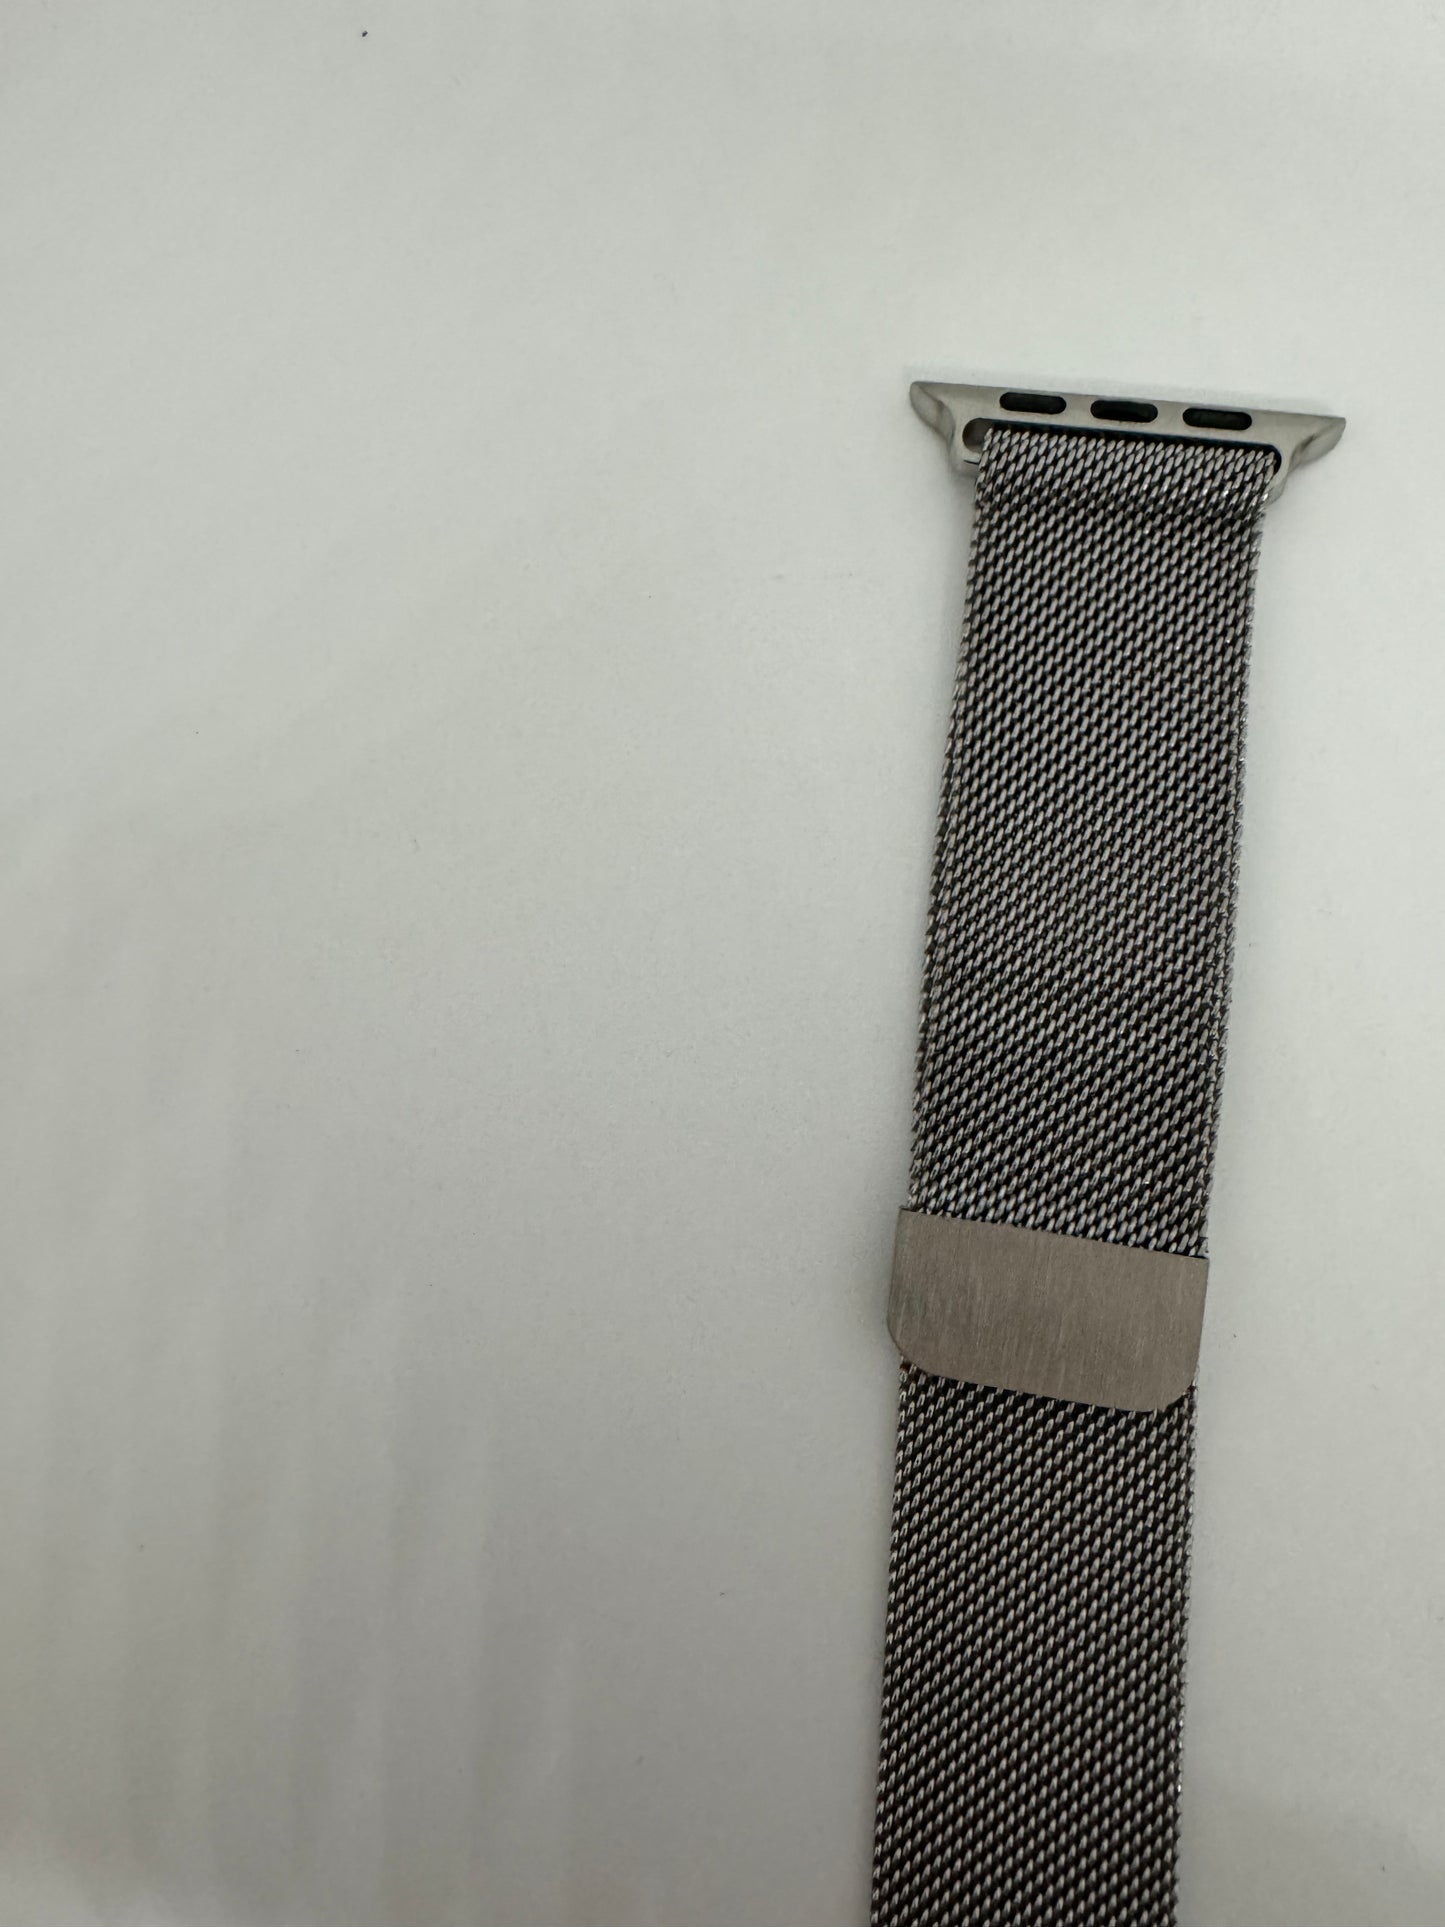 The picture shows a watch band against a white background. The band is made of a tightly woven metal mesh, giving it a sleek and modern appearance. The color of the band is a dark metallic, possibly stainless steel. The top part of the band has a connector with three small holes, which is likely used to attach it to a watch. There is also a metal clasp on the band, which is used to secure it around the wrist. The band appears to be new or in very good condition.